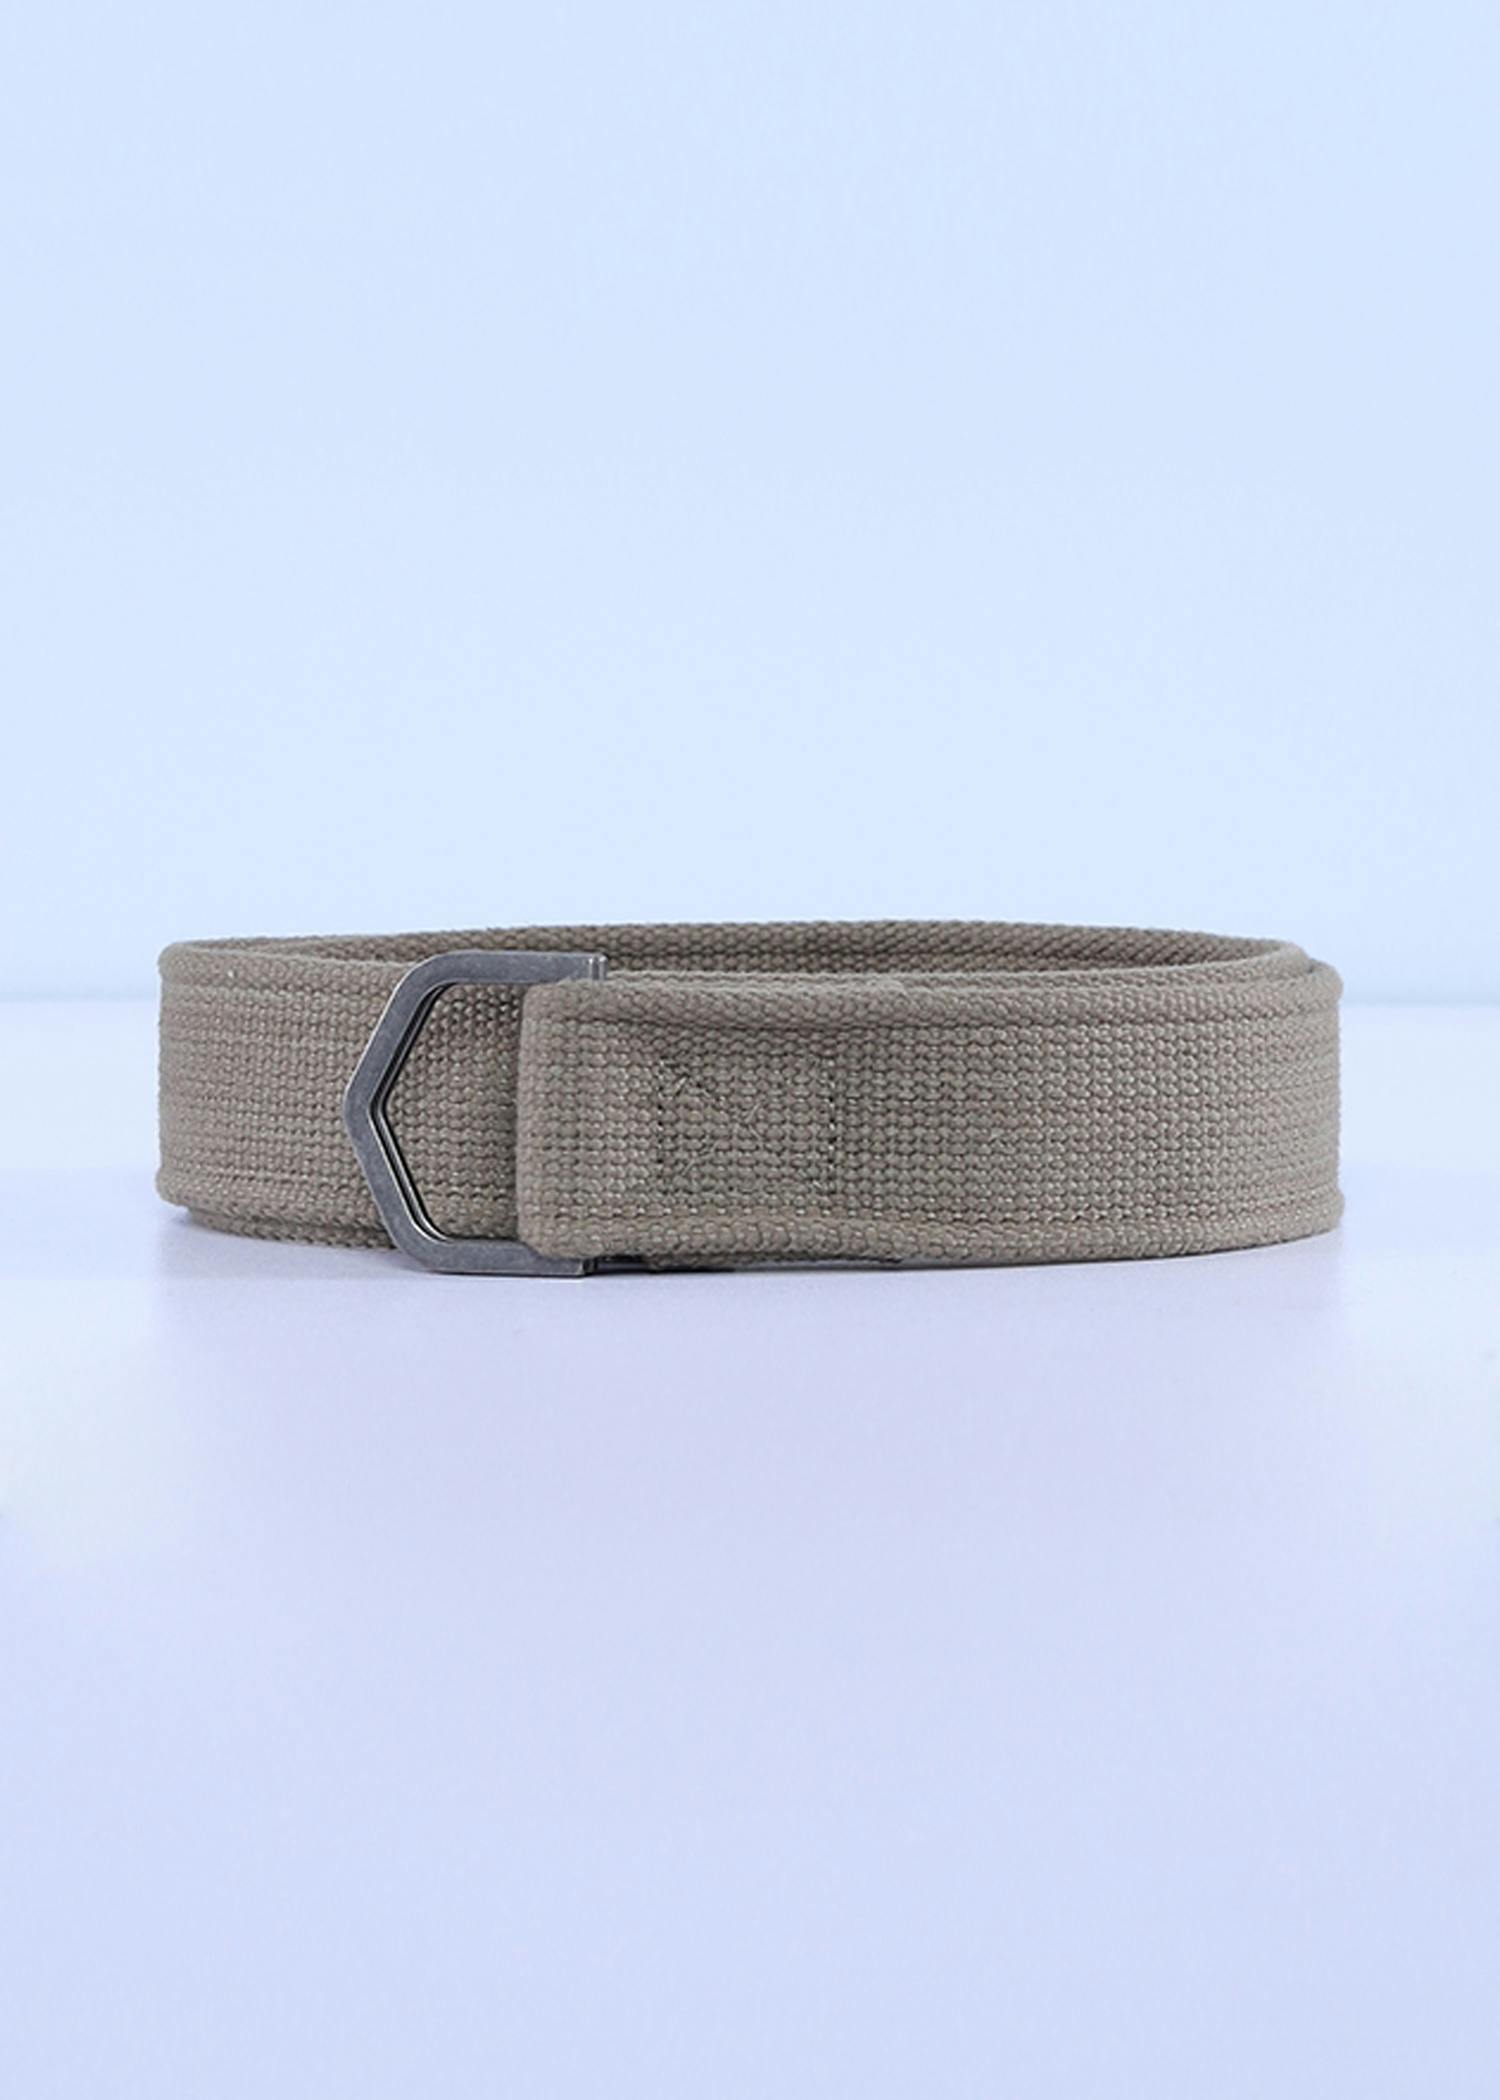 vulture mens belt army color cover